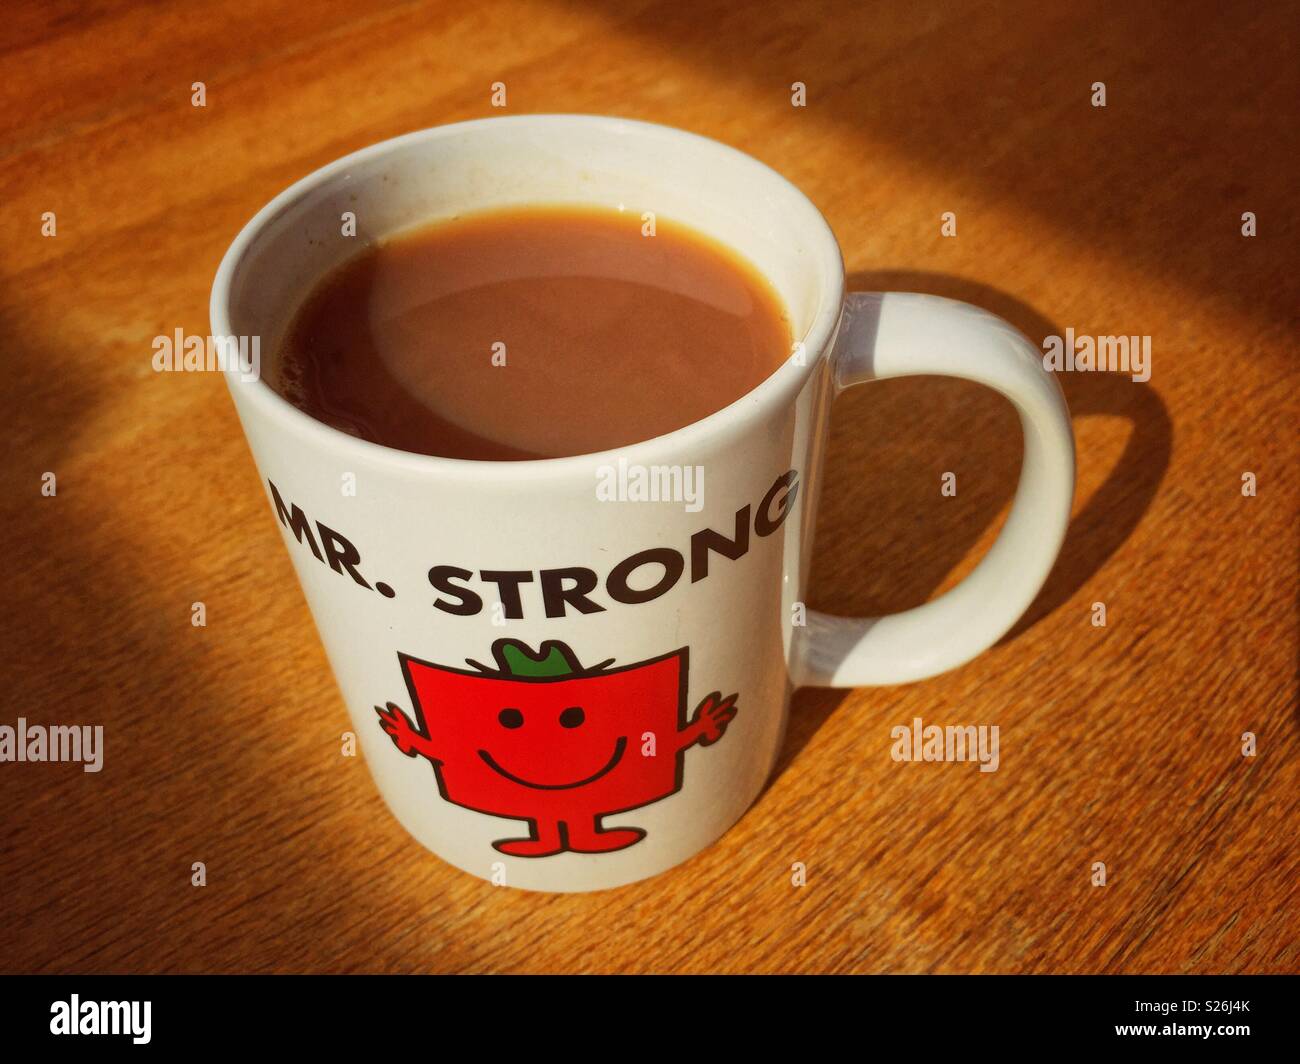 Amusing photo of Mr. Men’s Mr. Strong mug filled with strong tea on wooden table. Sunshine causing dark shadows of mug and handle. Stock Photo